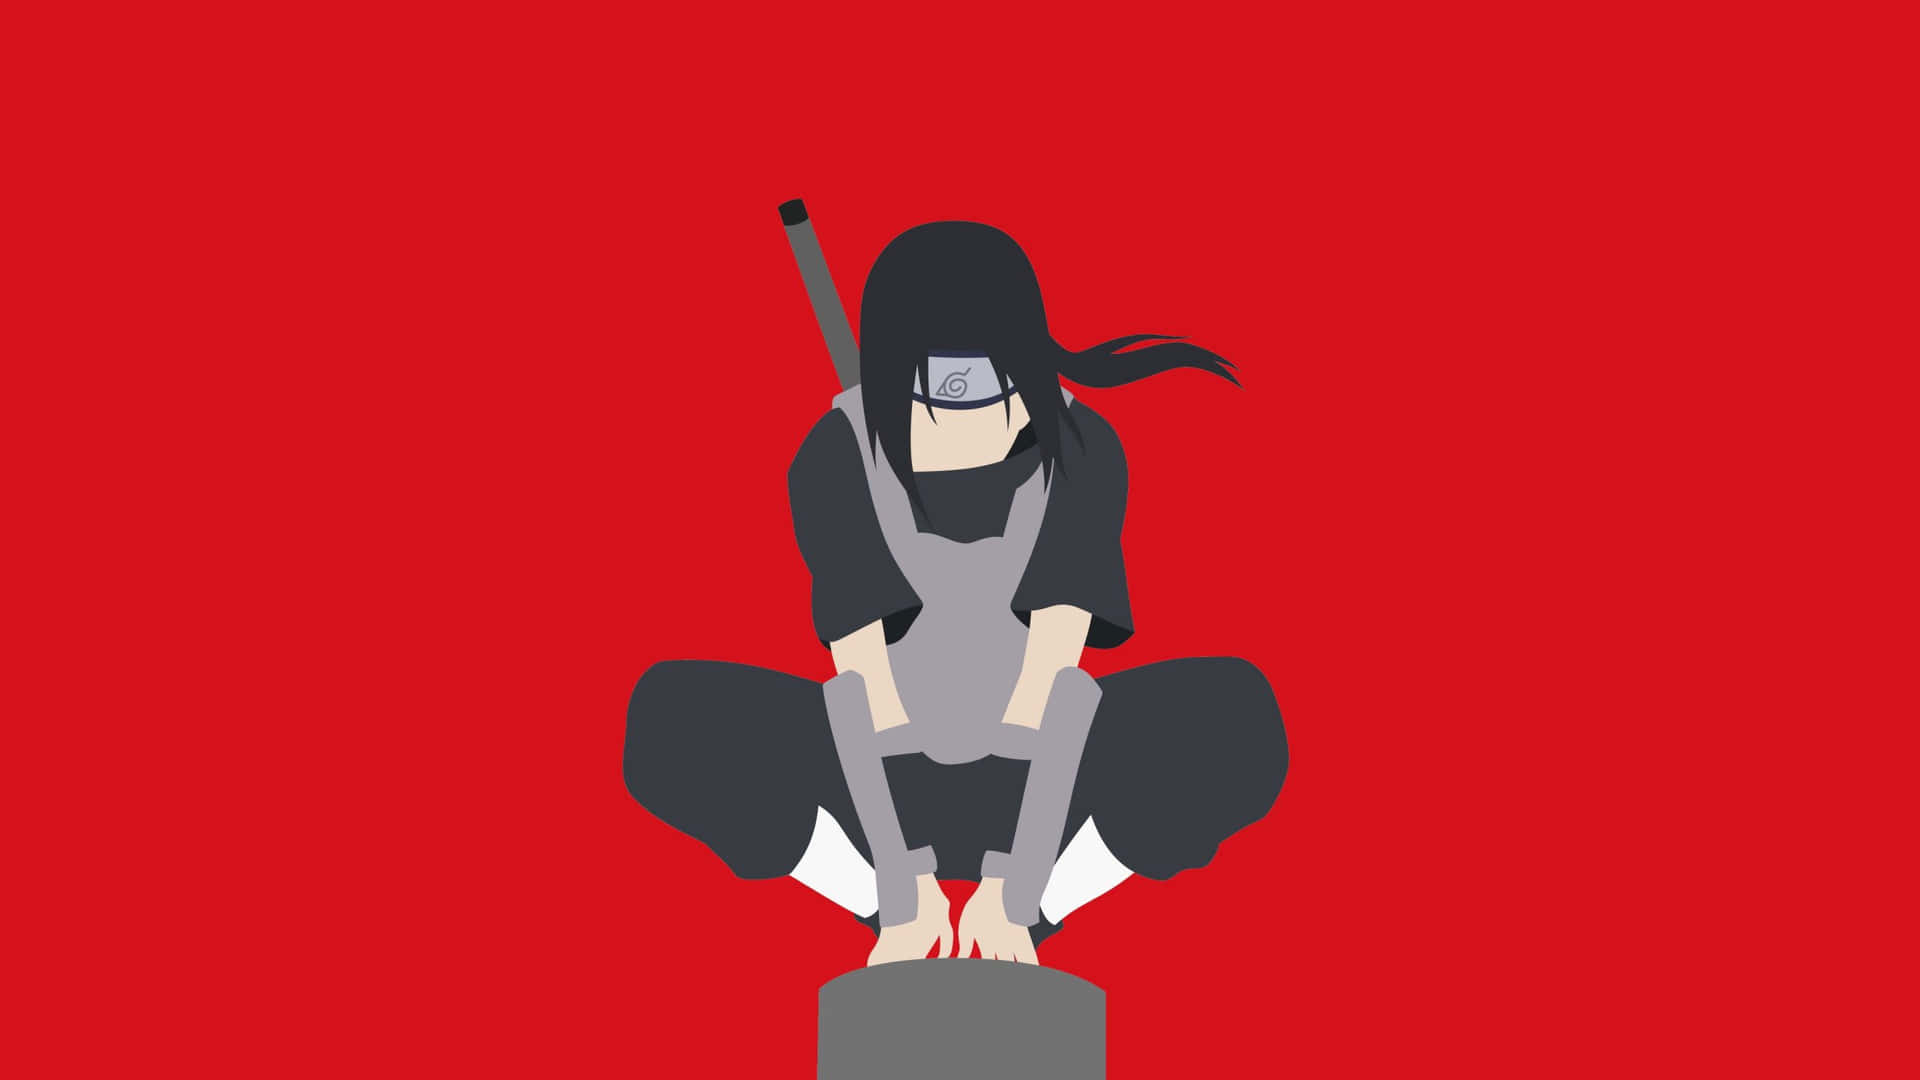 10 Minimal Naruto Wallpapers to bring your smartphone to life  Page 5 of  6  The RamenSwag